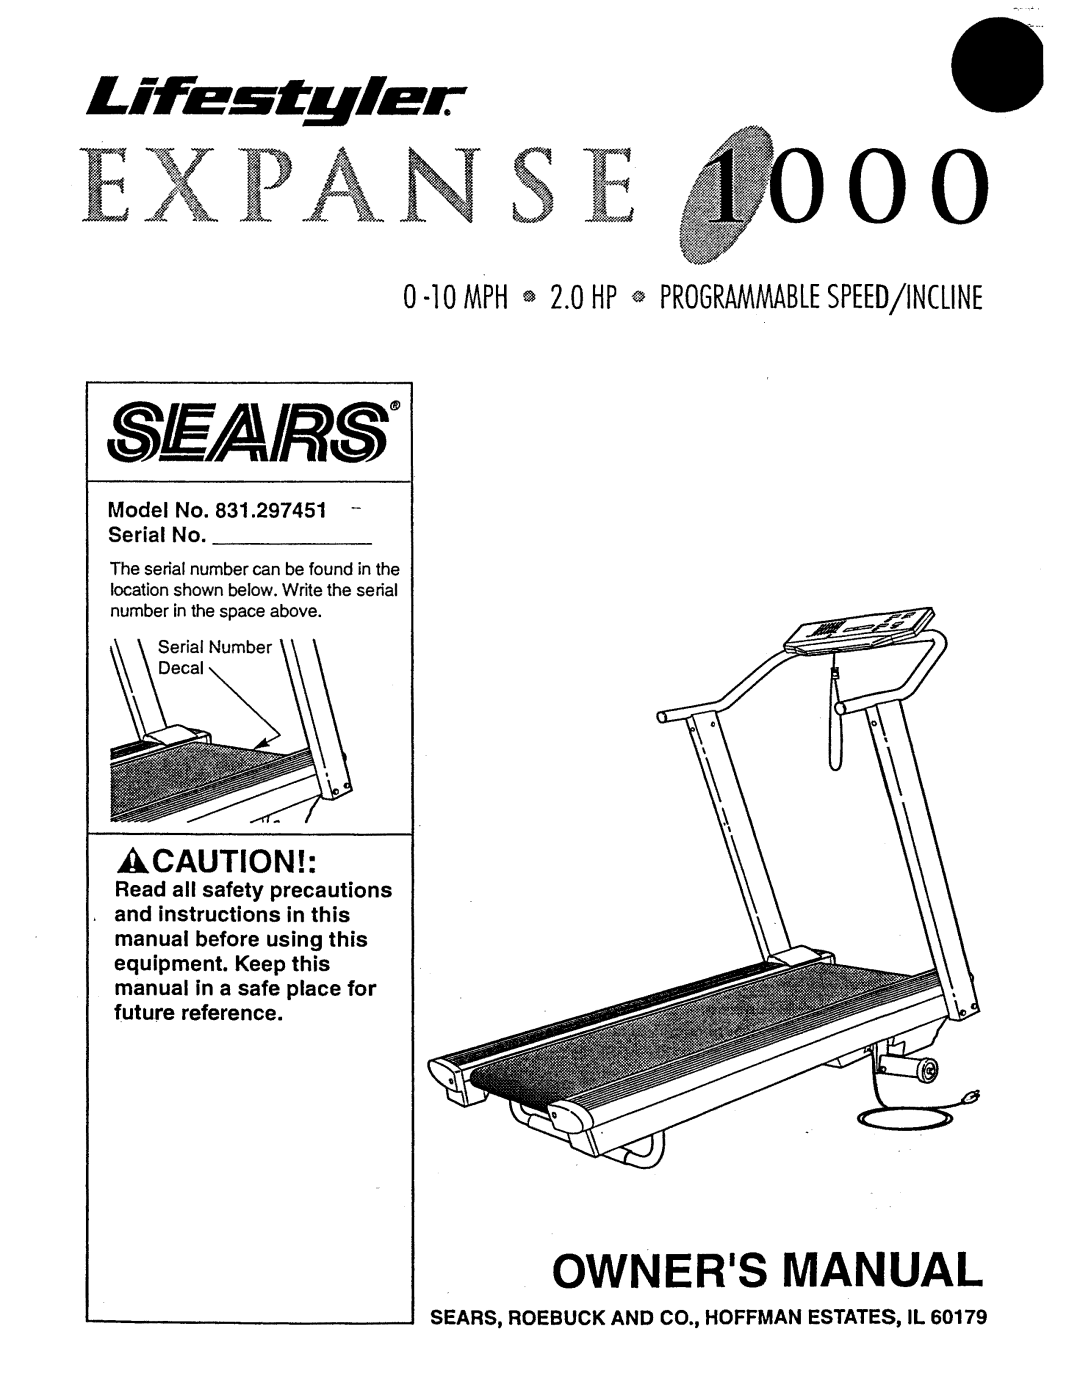 Sears 831.297451 owner manual kCAUTION, Owners Manual, 0-10MPH 2.0HP PROGRAMMABLESPEED/INCLINE, Model No Serial No 